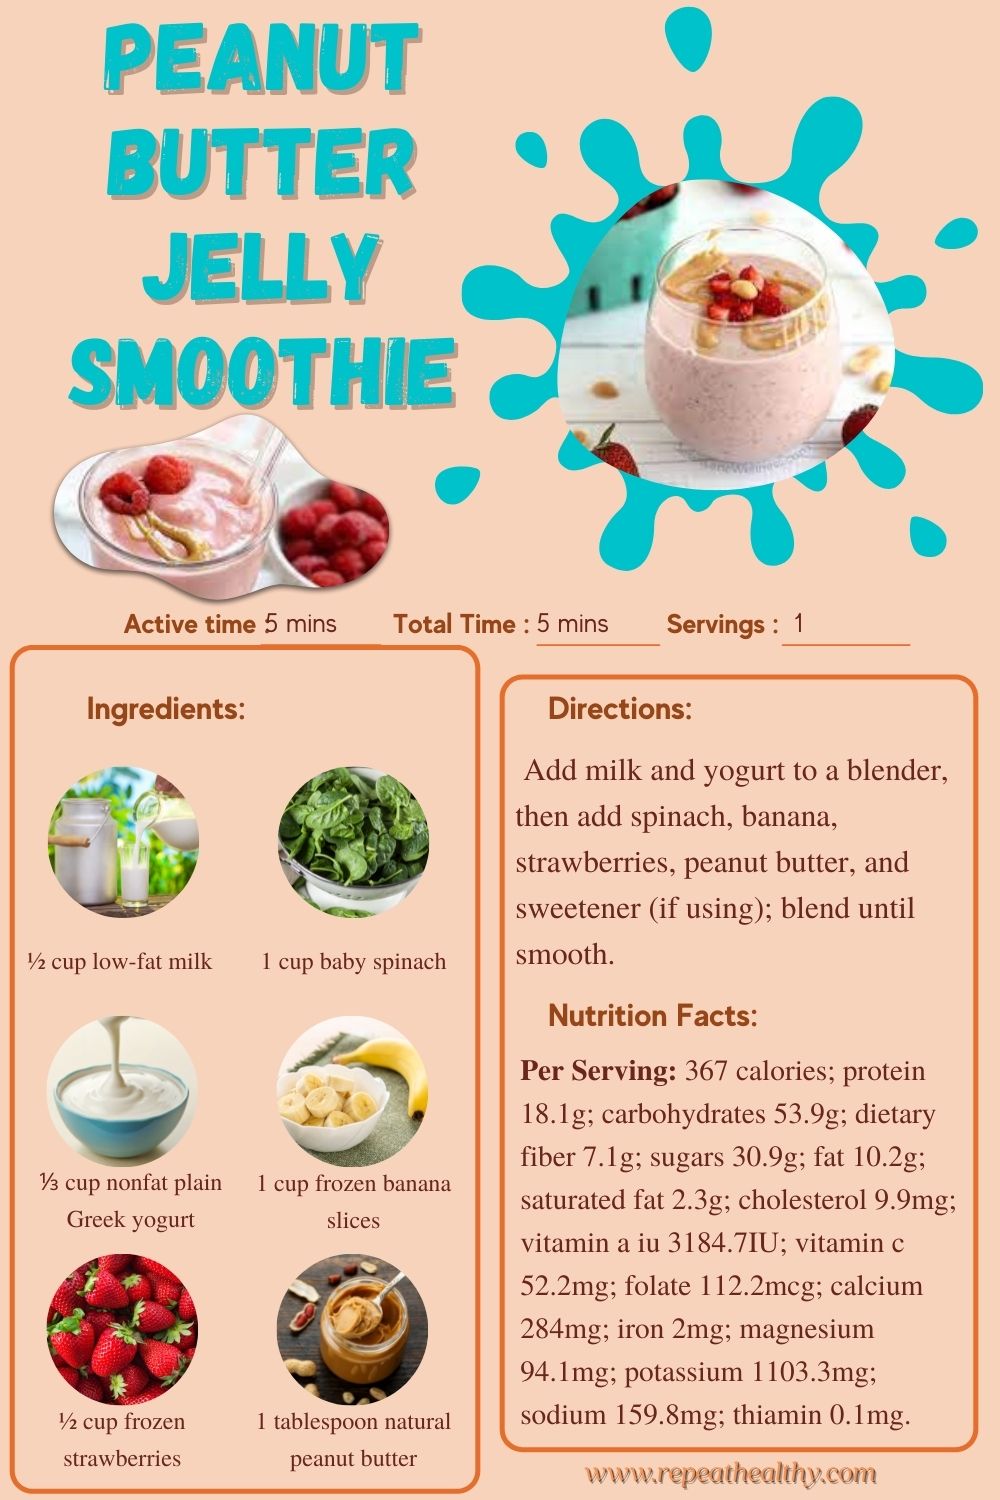 Peanut Butter Jelly Smoothie Recipe